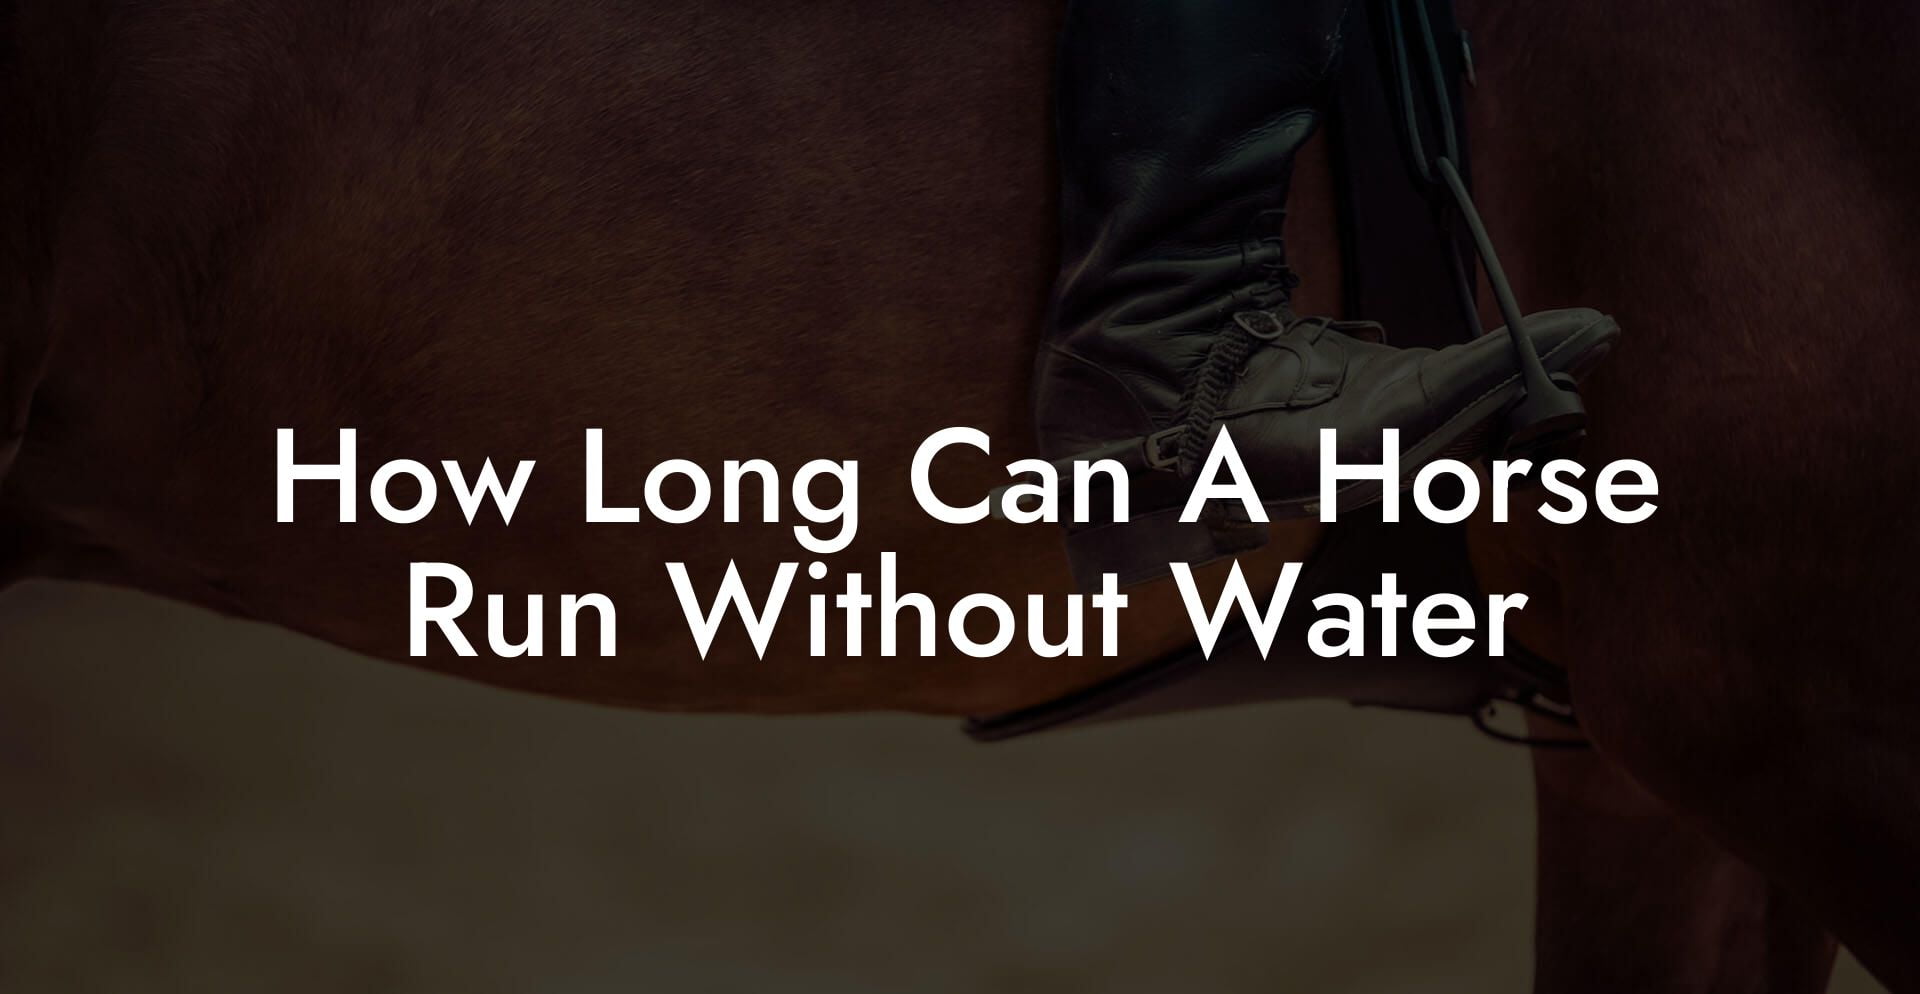 How Long Can A Horse Run Without Water